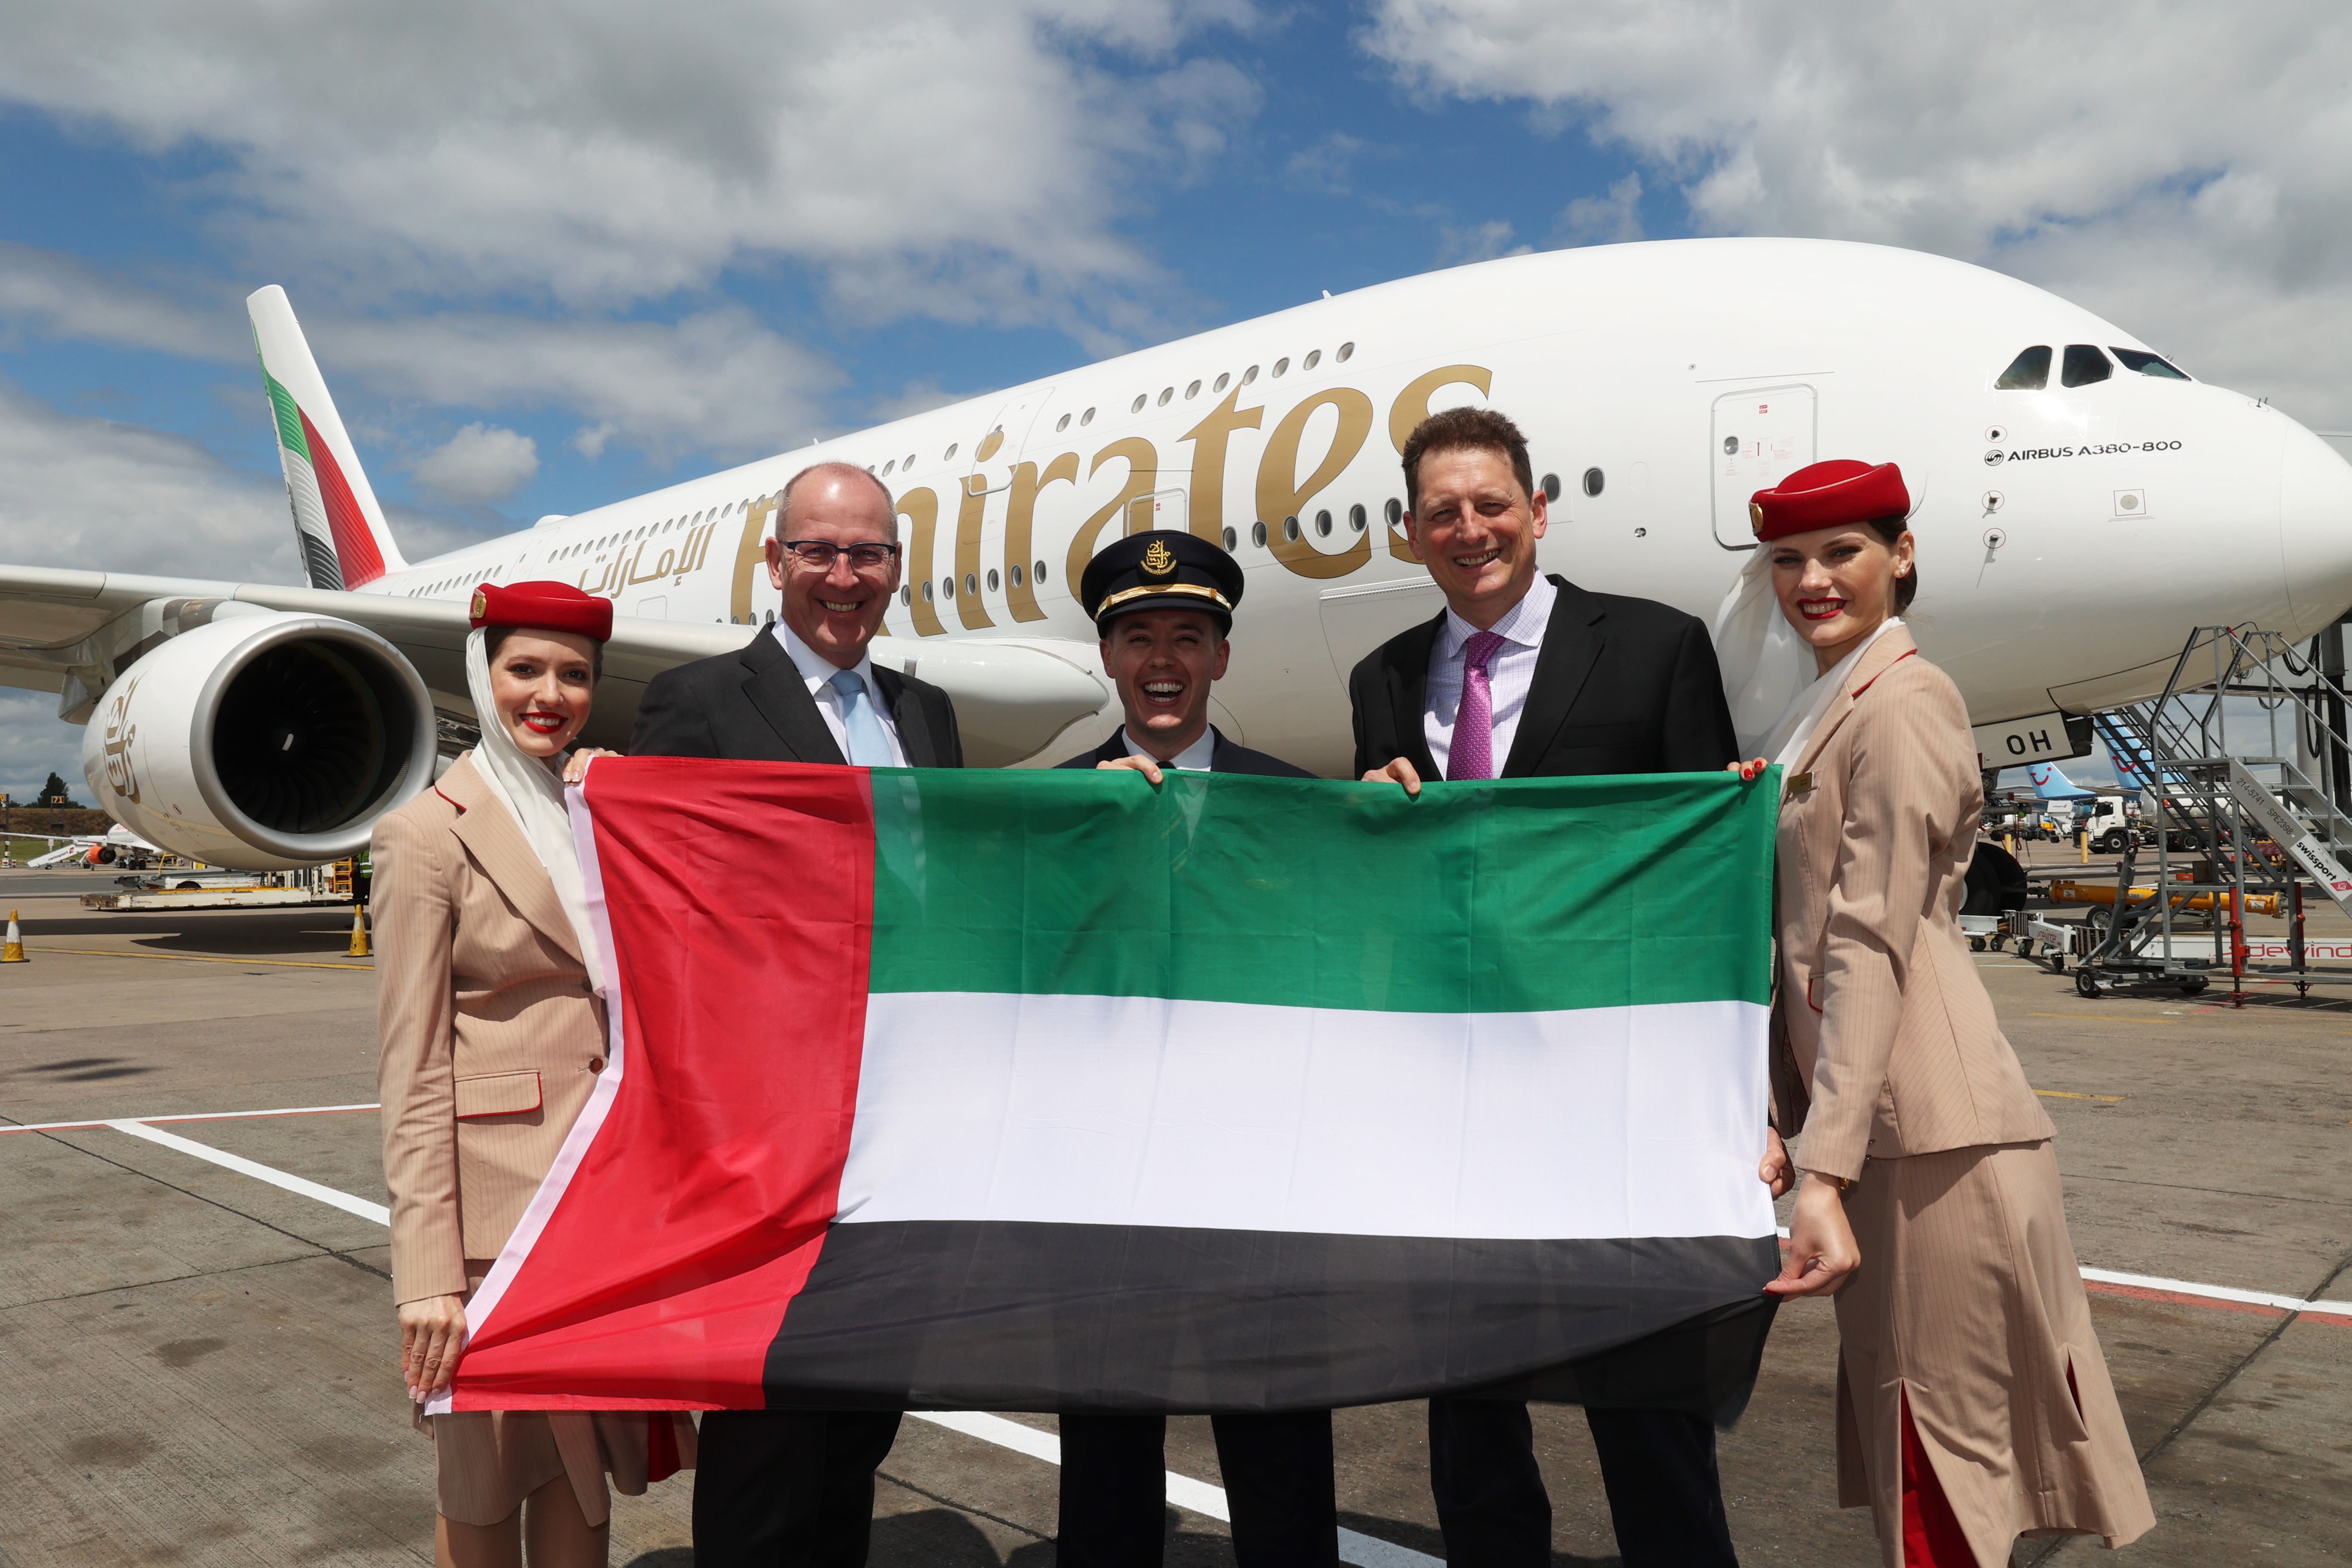 Three major Gulf Airlines invest in the West Midlands